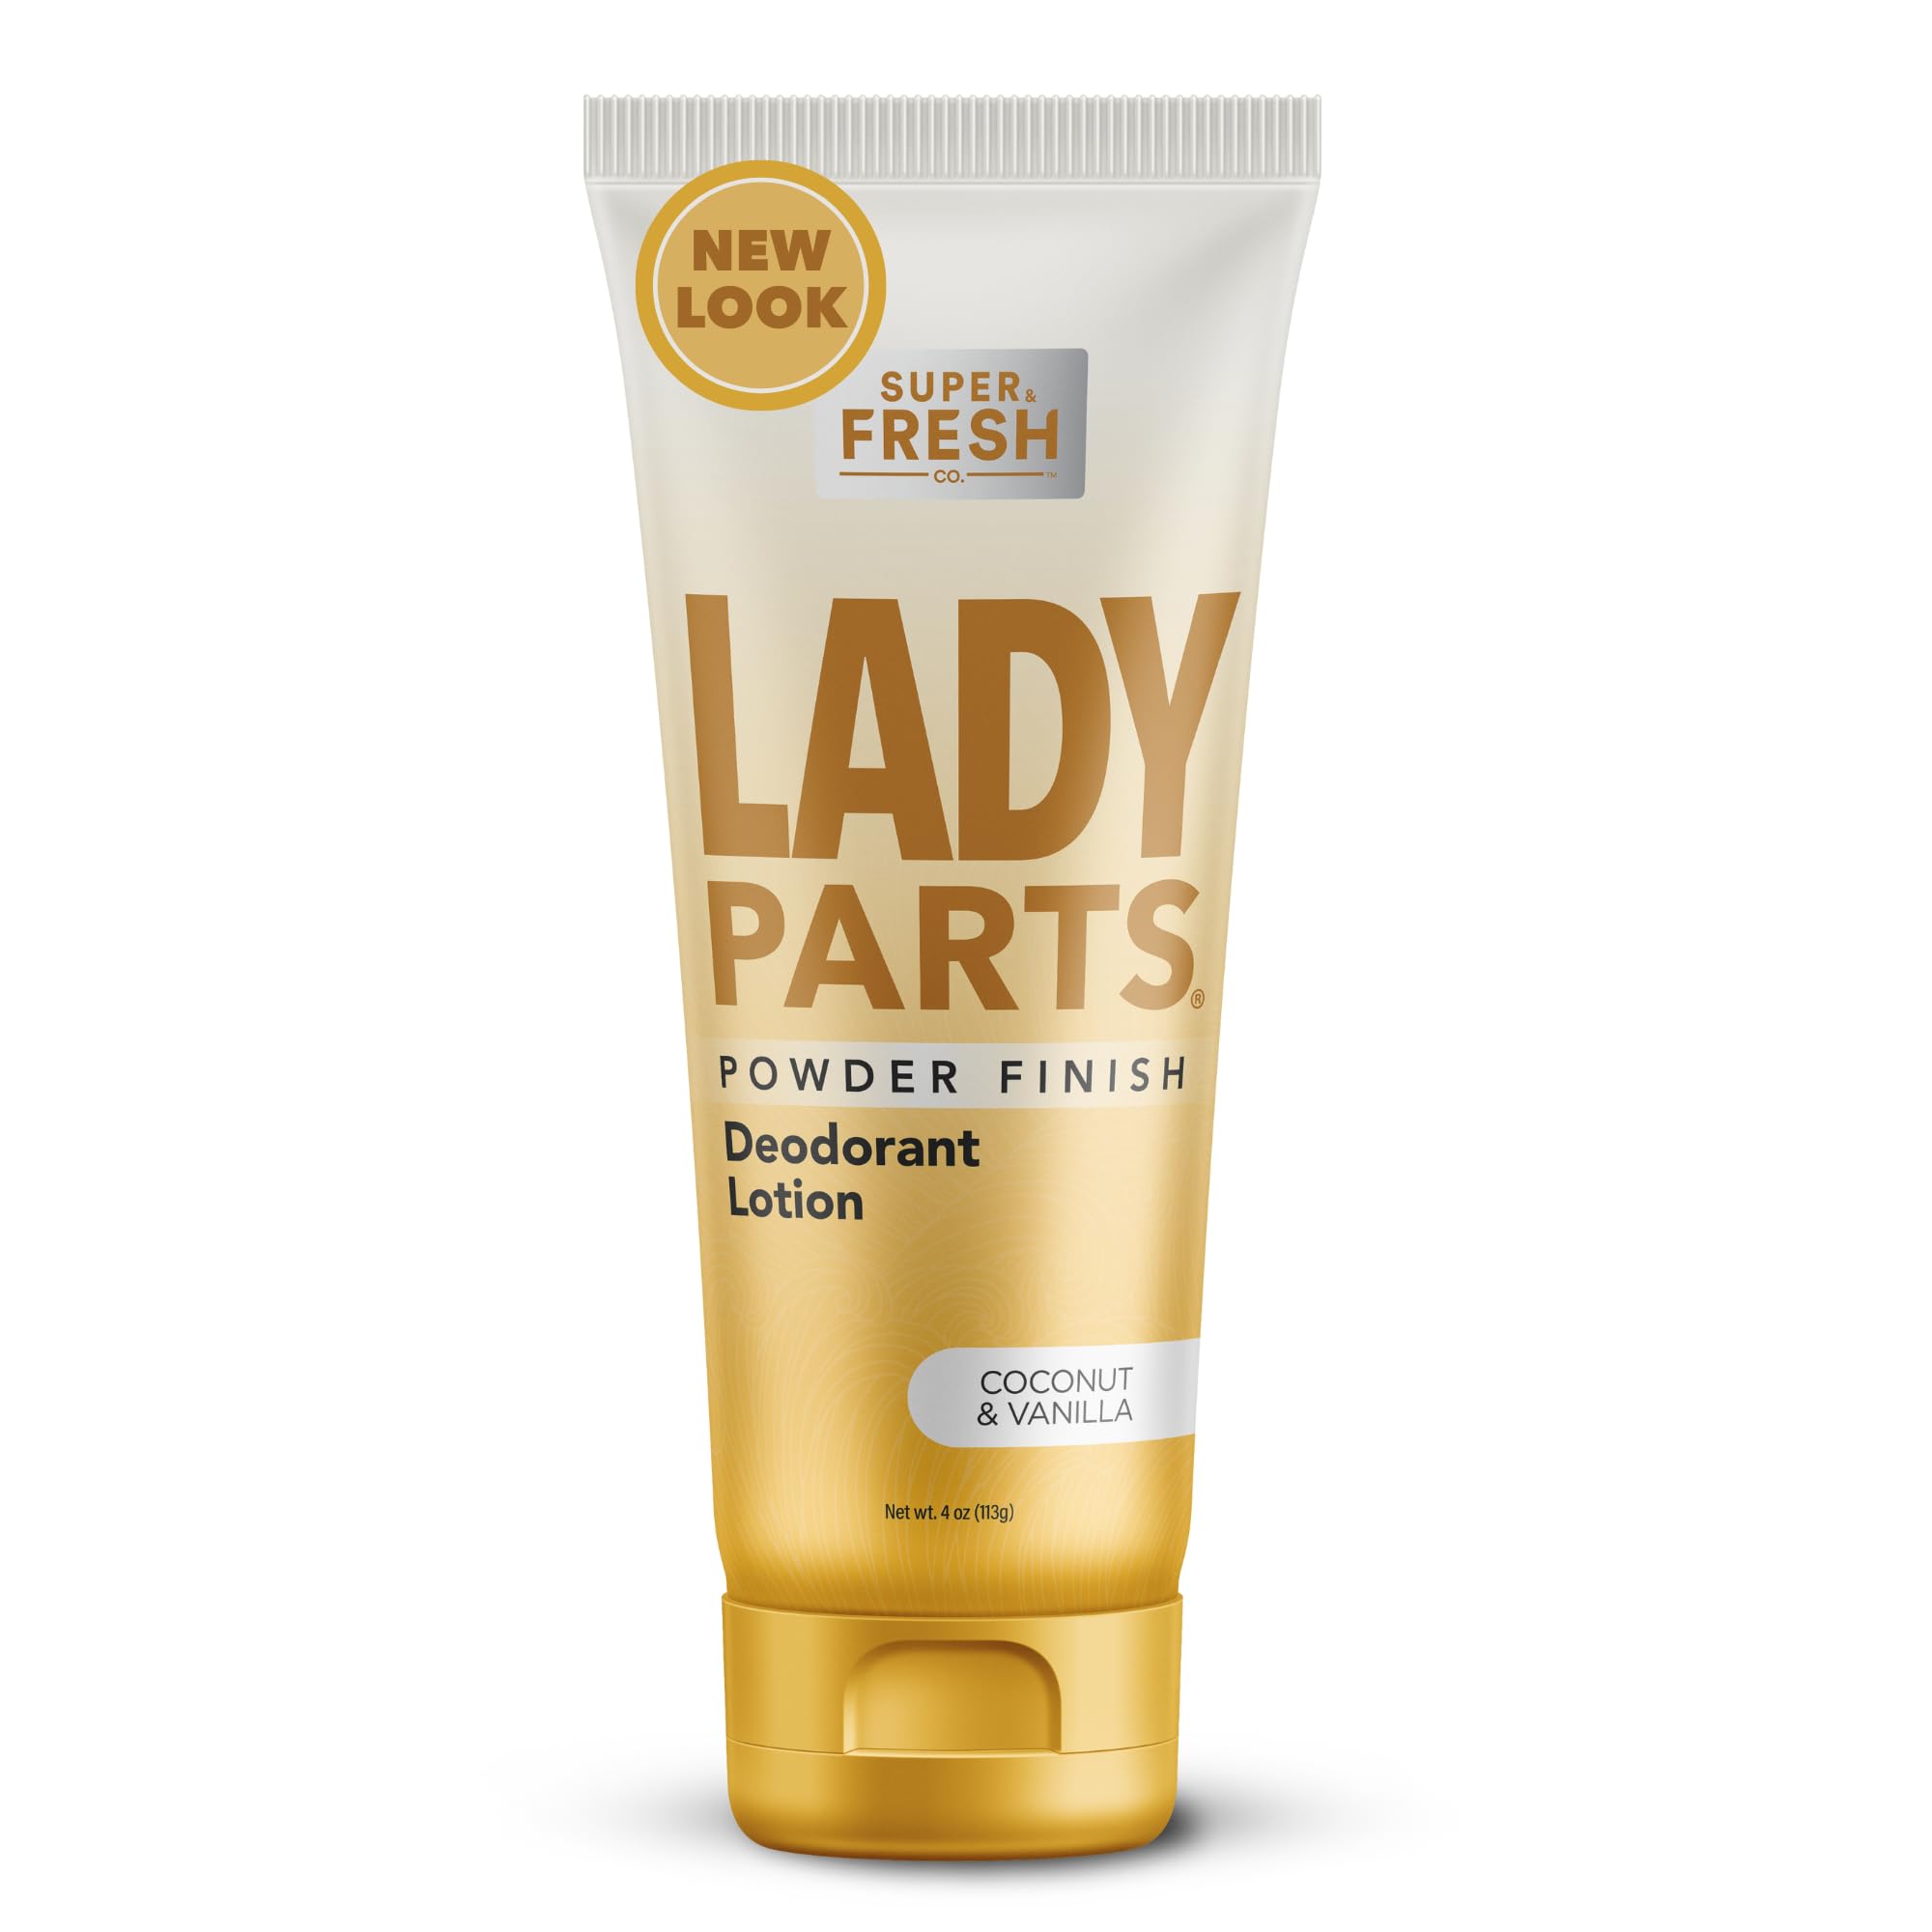 Super Fresh Lady Parts - Full Body & Private Parts Deodorant For Women - LOTION to POWDER Cream to Stop Odor - Reduce Friction & Absorb Sweat - Aluminum Free Feminine Hygiene - Lightly Scented - 4oz